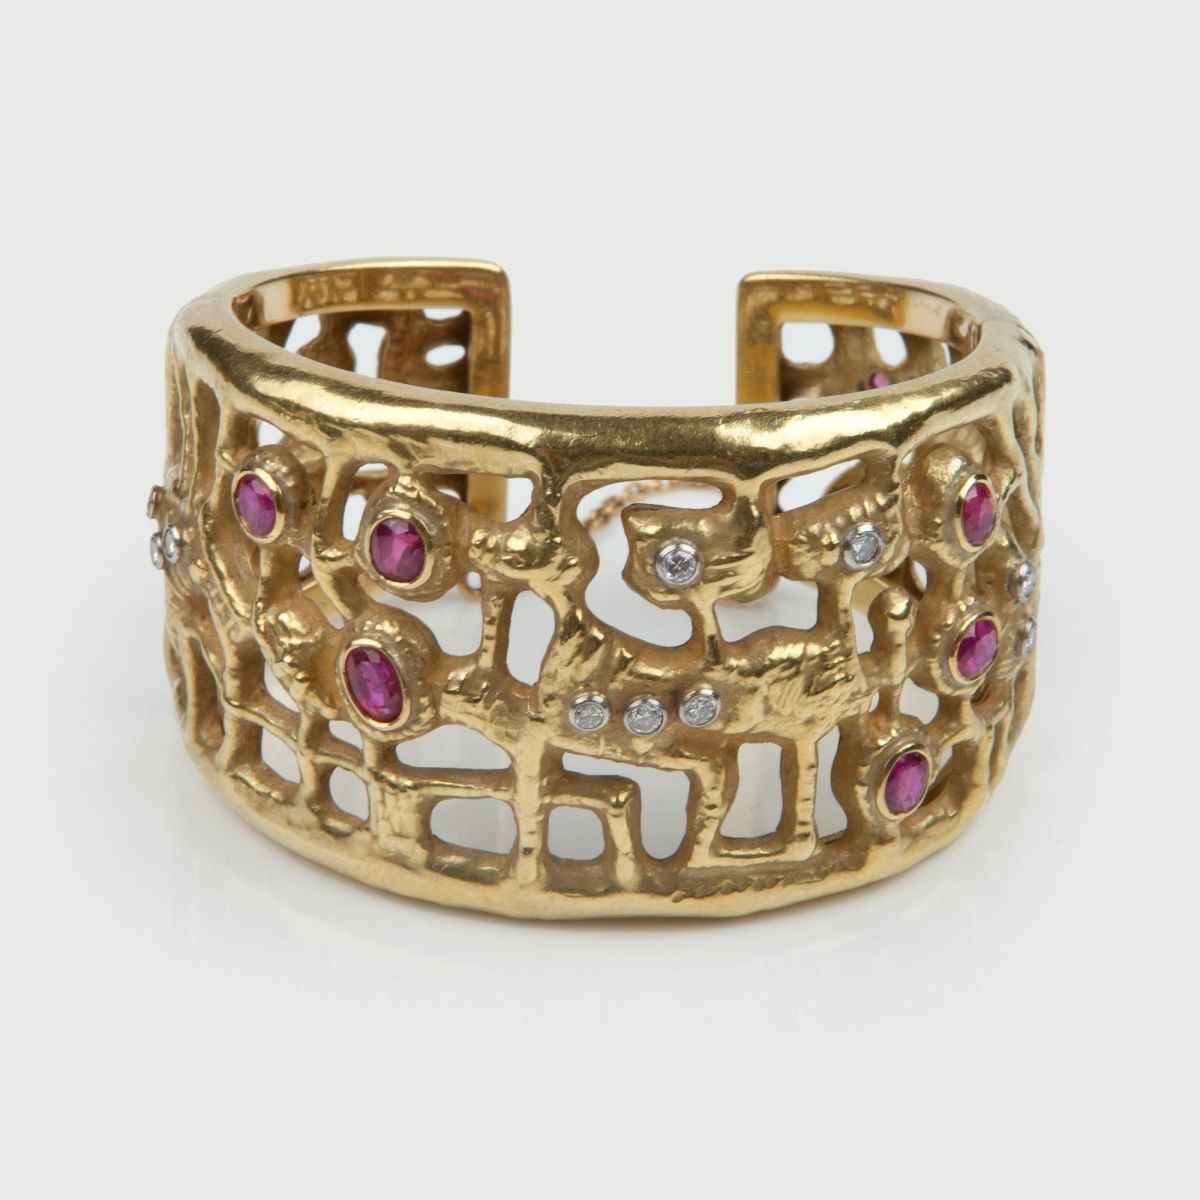 An 18kt gold bangle set with rubies and diamonds, c. 1960, designed by Italian painter Afro Basaldella and made in the workshop of Diderico Gherardi for Mario Masenza, Rome.